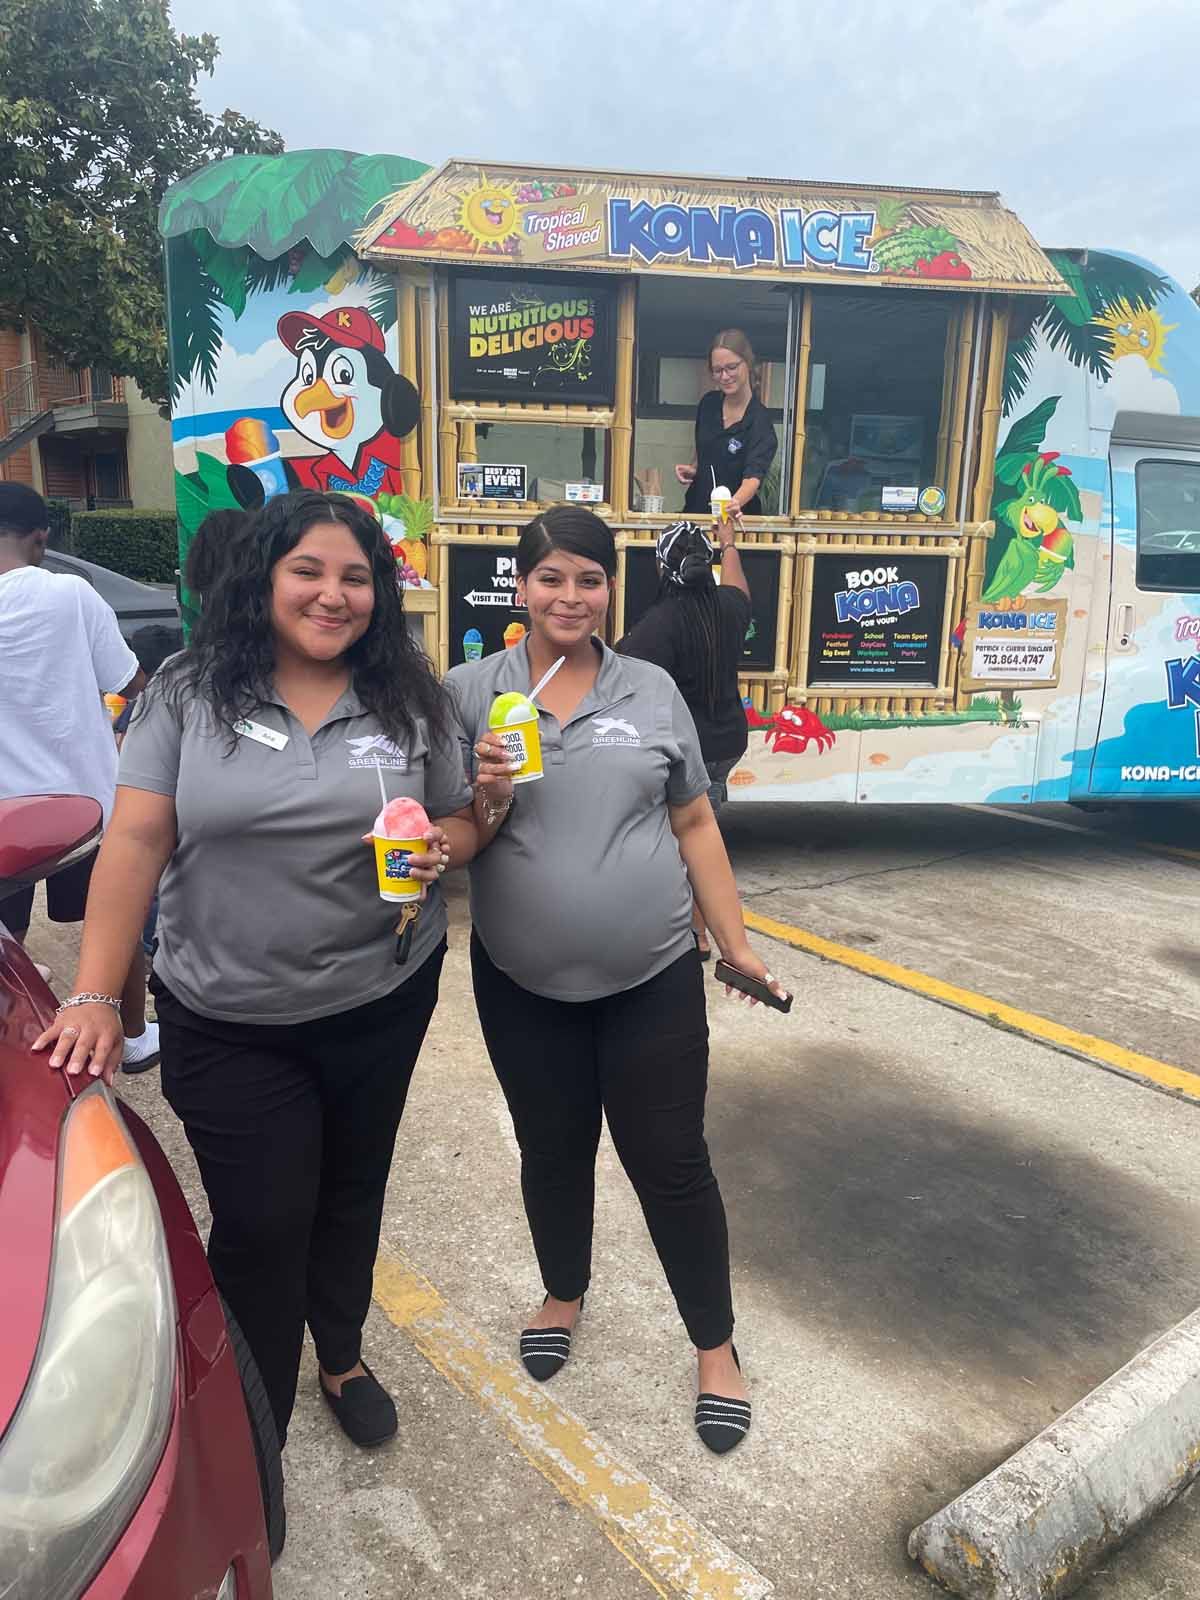 two ladies wearing matching gray shirts standing in front of a Kona Ice truck